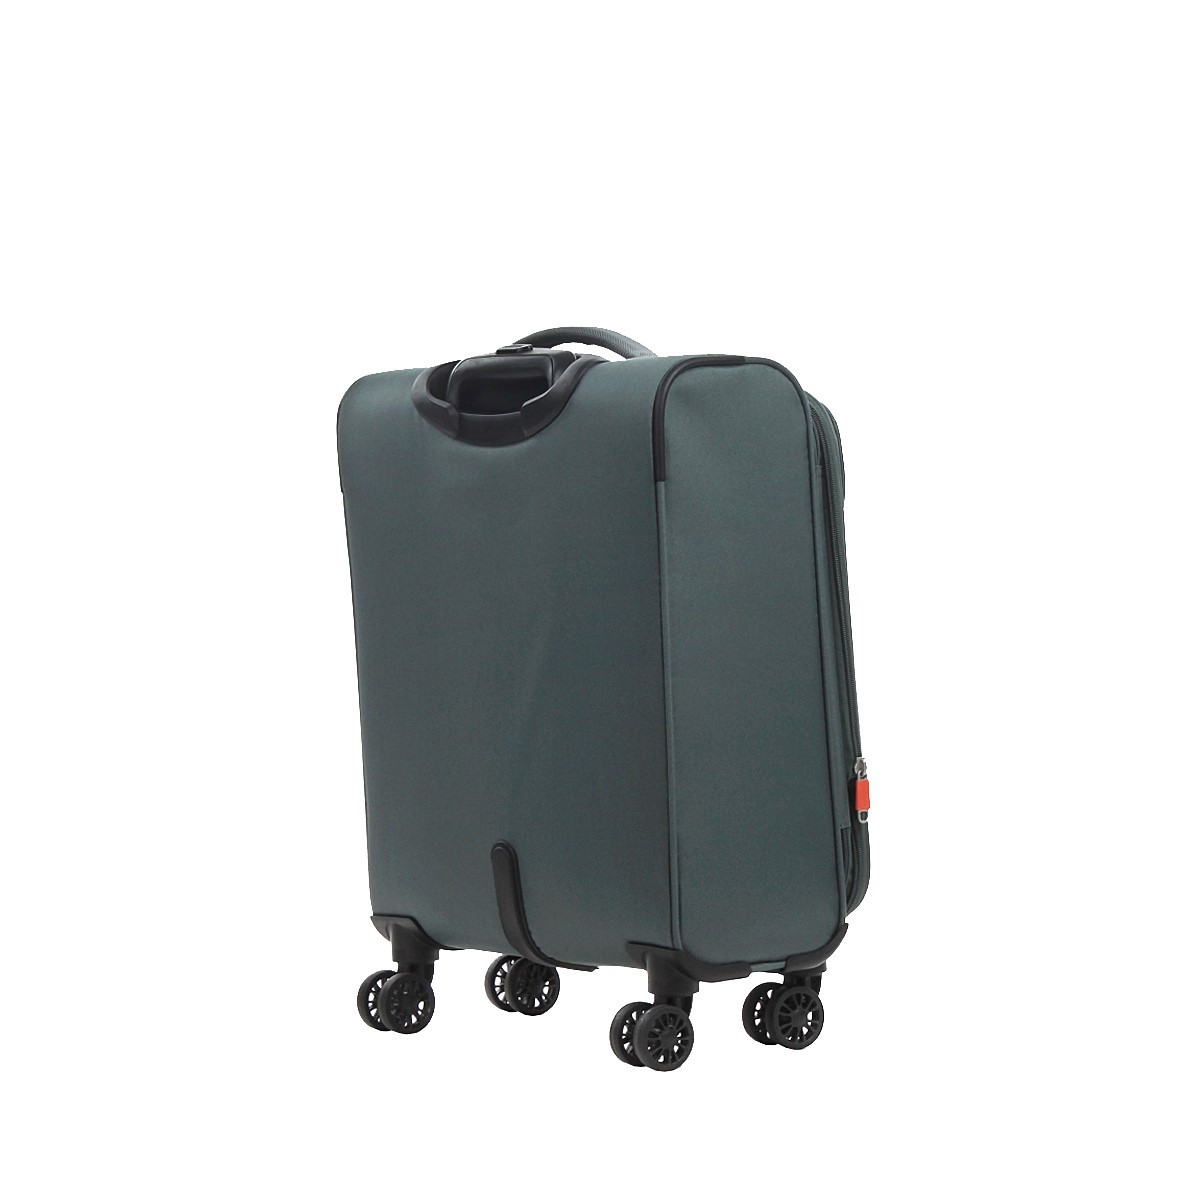 American tourister by samsonite Spinner cabina 4 ruote Dark forest Pulsonic MD6*04001